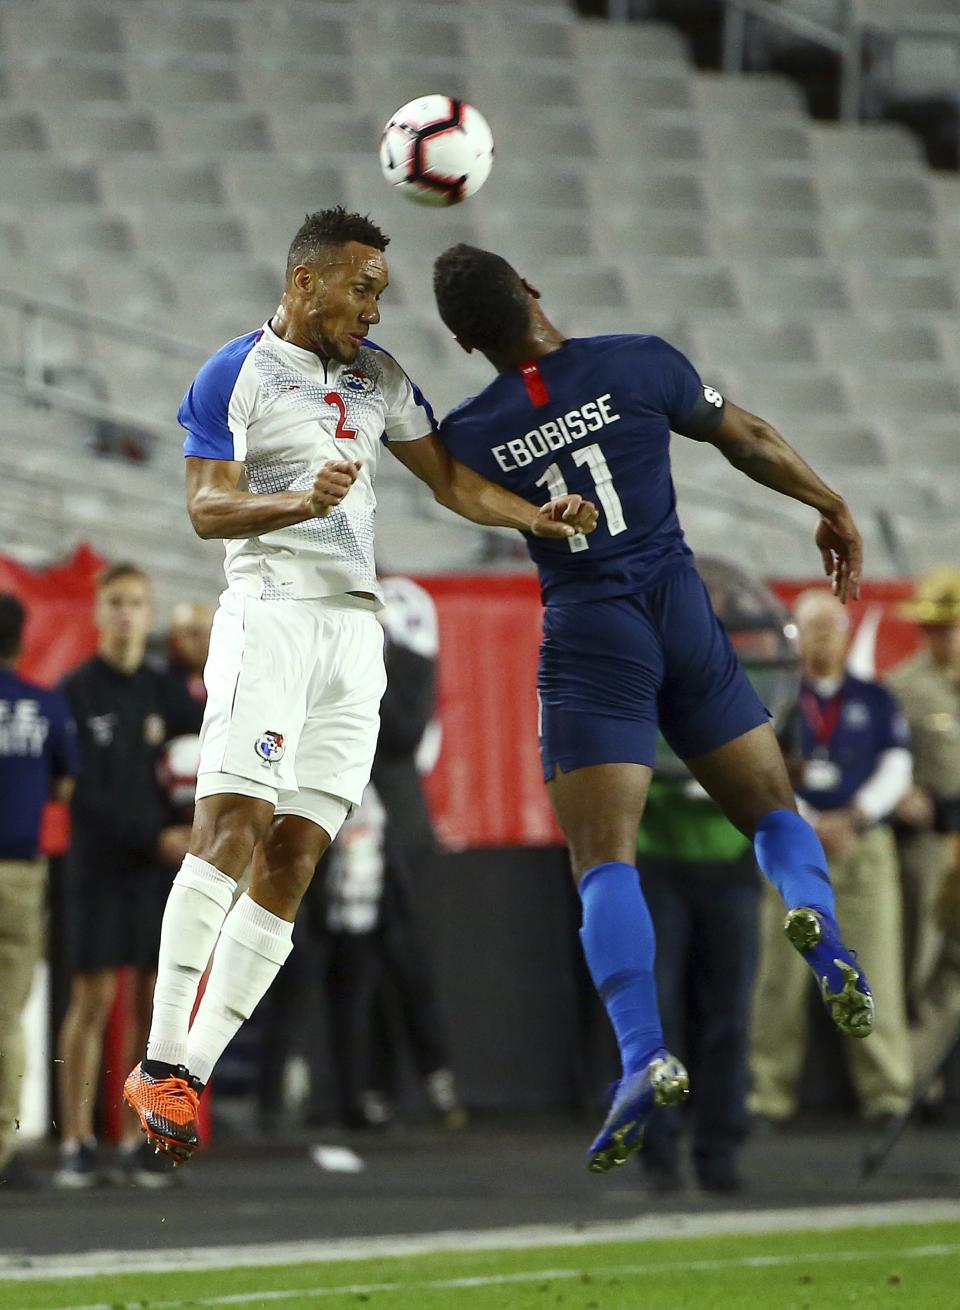 Panama defender Francisco Palacios (2) and United States forward Jeremy Ebobisse (11) arrives at the ball at the same time during the first half of a men's international friendly soccer match Sunday, Jan. 27, 2019, in Phoenix. (AP Photo/Ross D. Franklin)